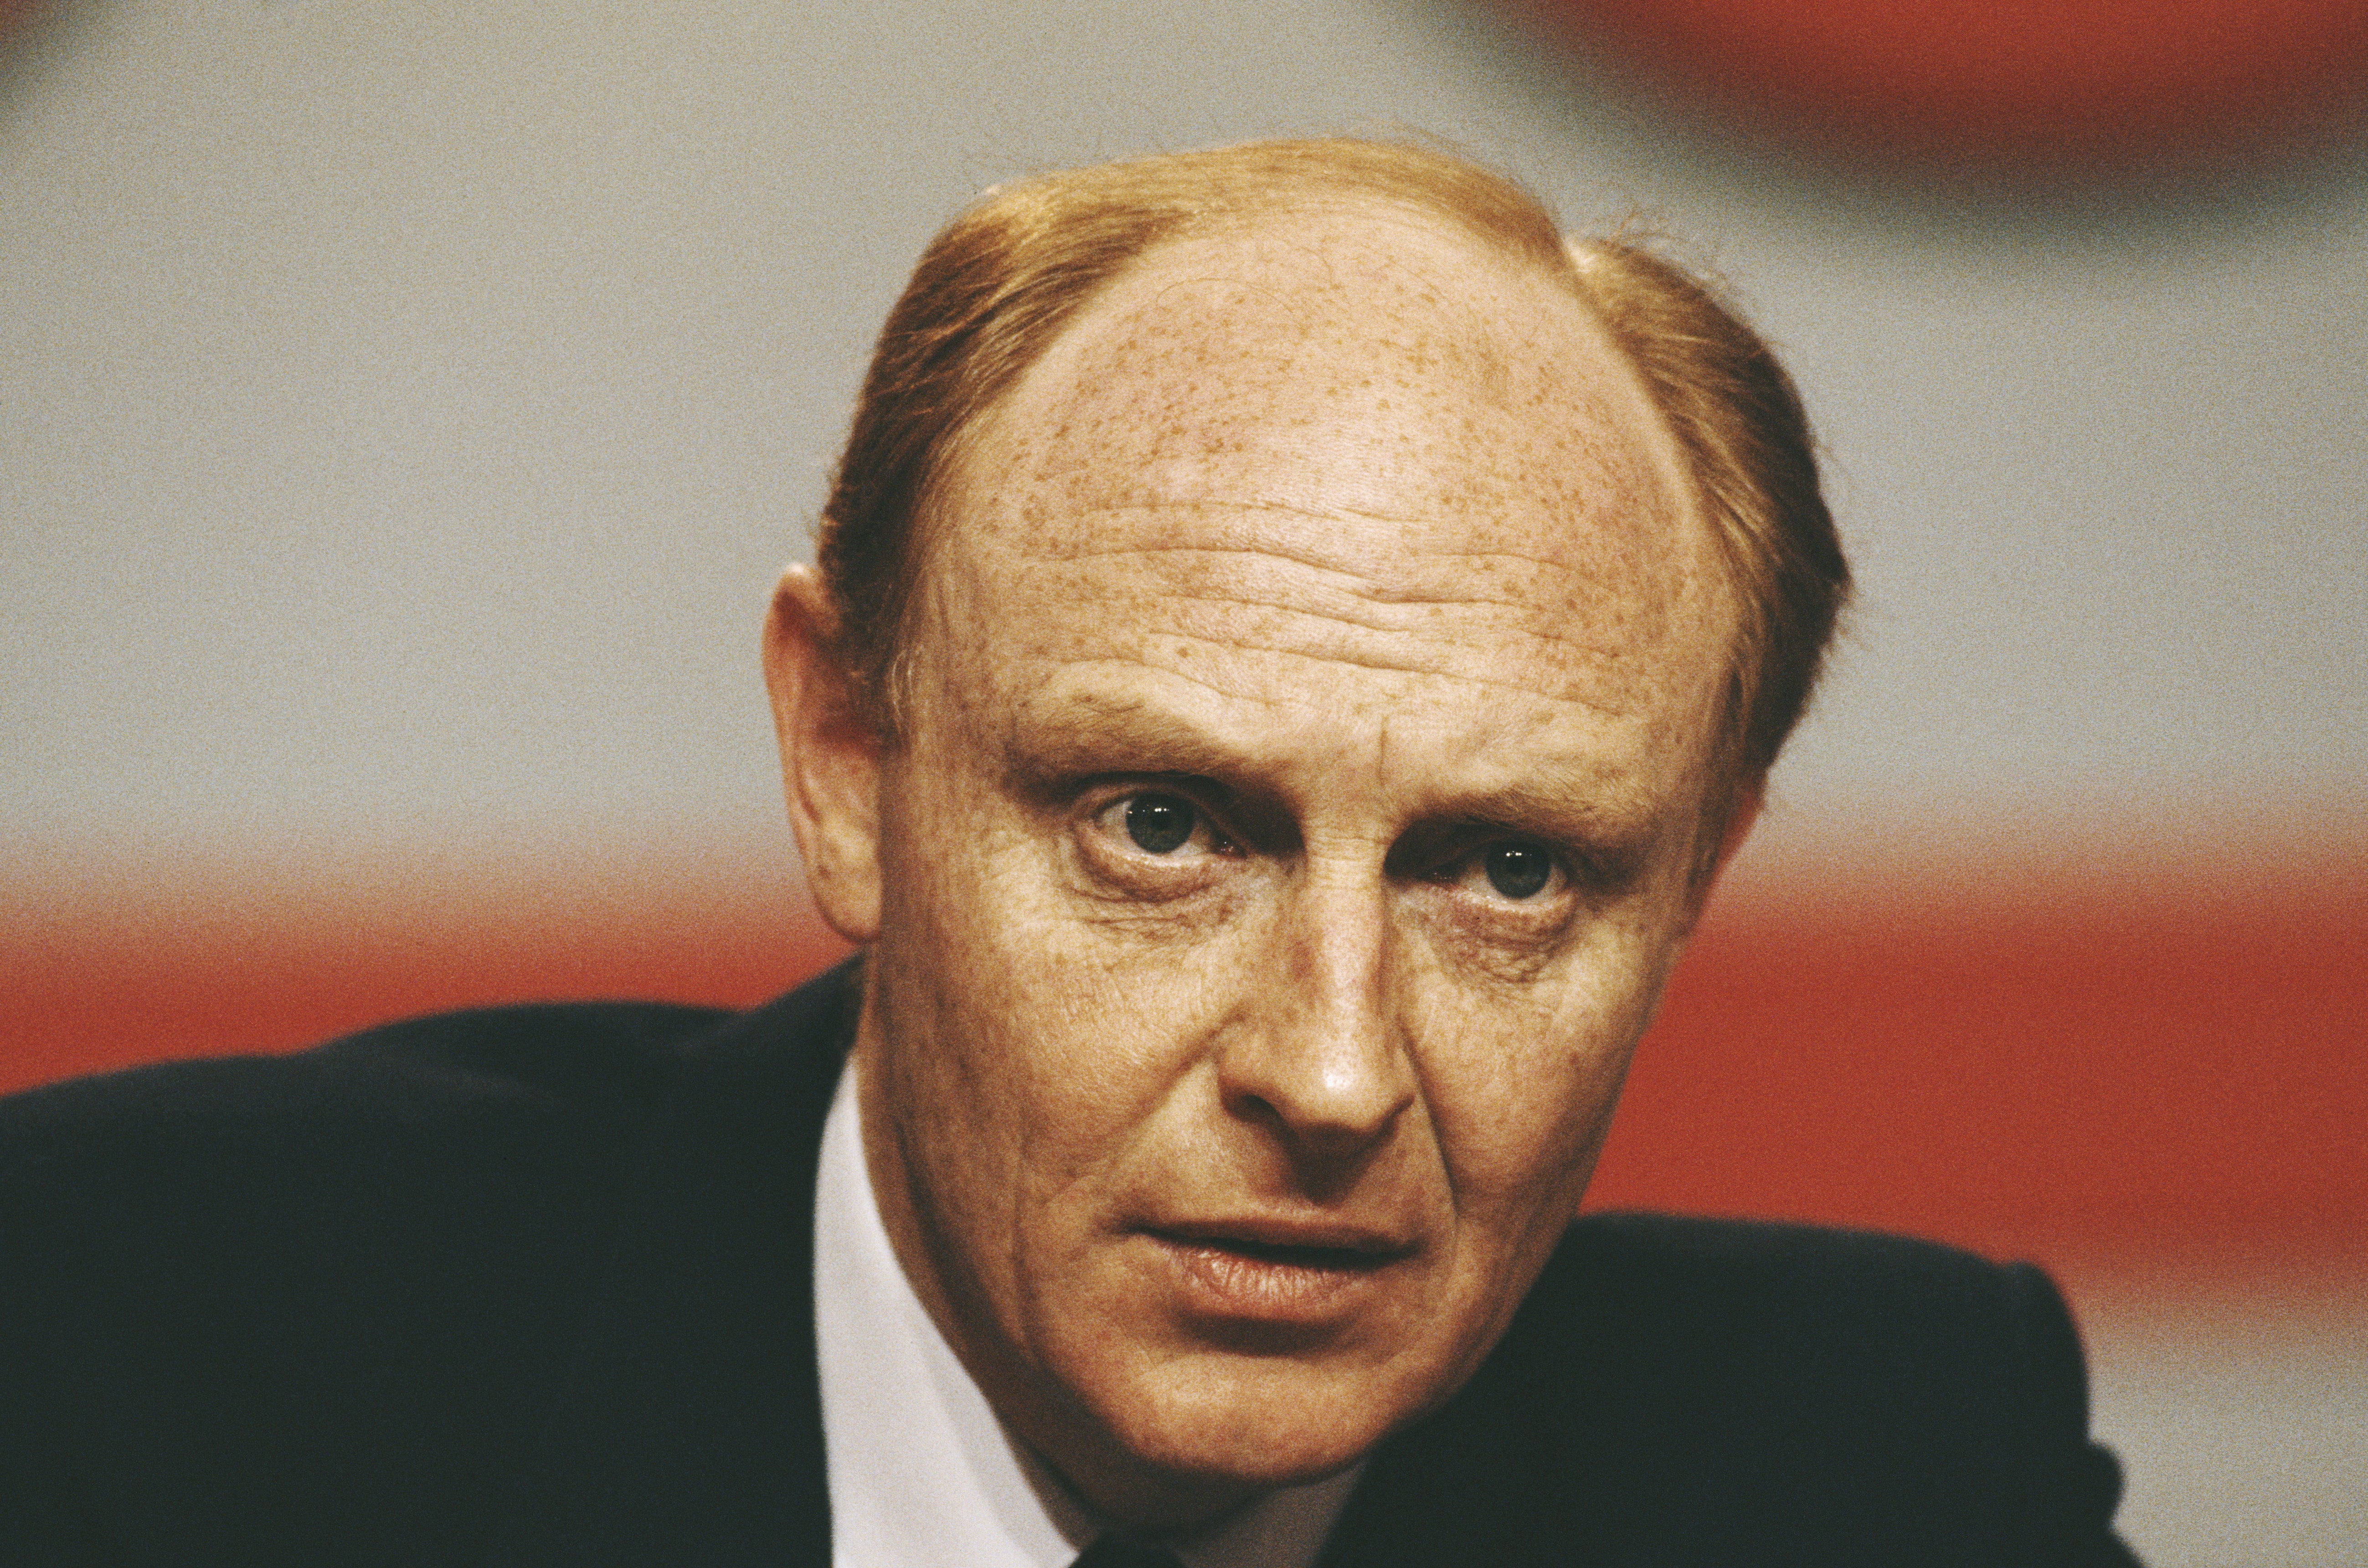 In the 1992 election, Basildon sounded the death knell for Neil Kinnock, where the Tories repelled a Labour challenge